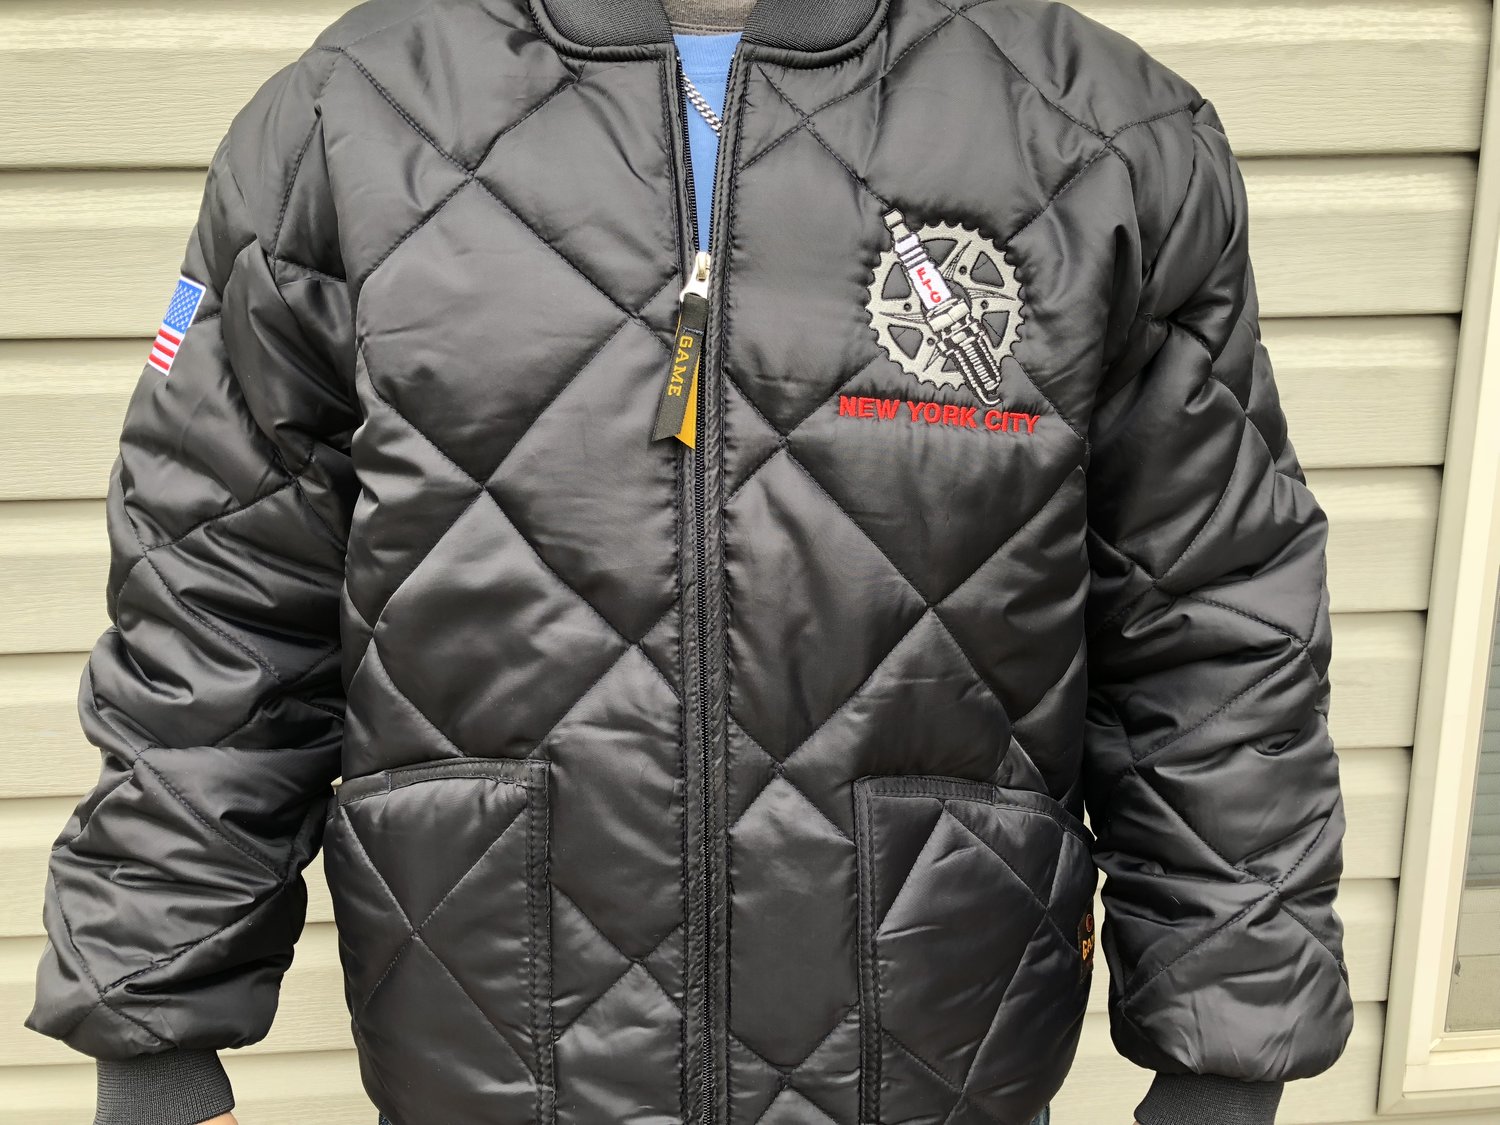 Sportswear Quilt FTC Cycles Throttle — Full NYC Jacket Diamond Game